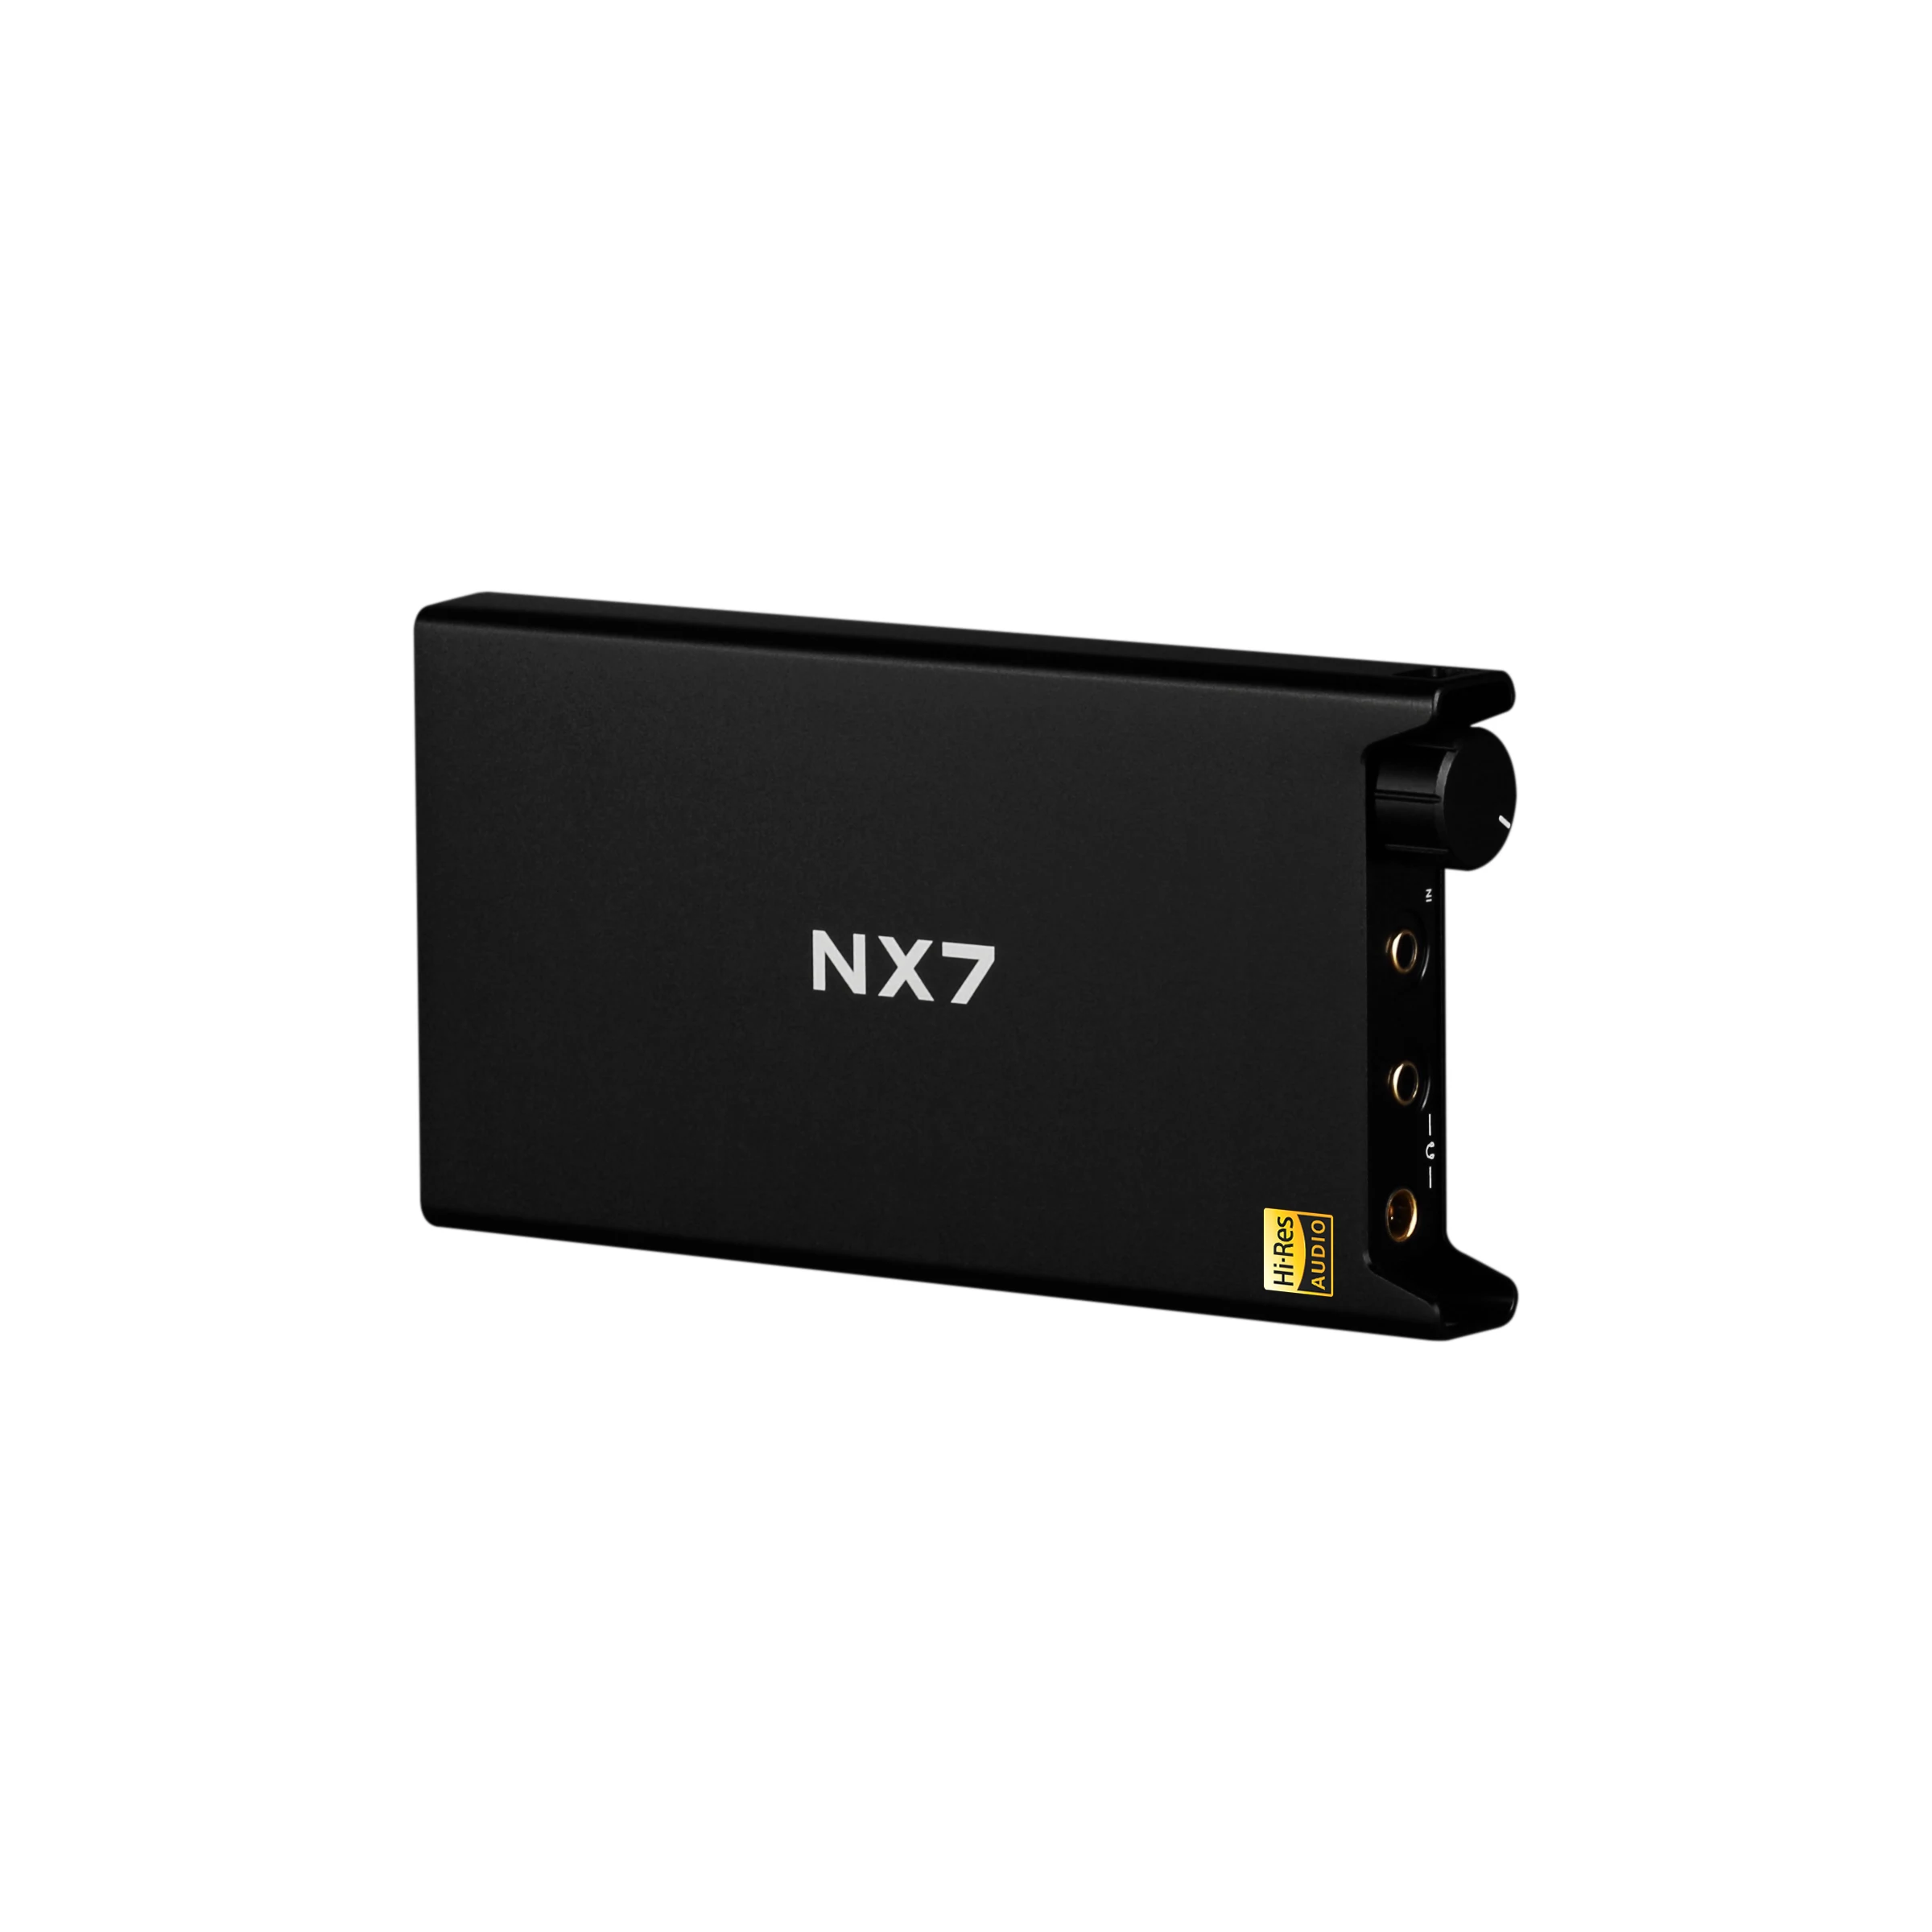 TOPPING NX7 Portable NFCA Headphone Amplifier 1400mW Output Power with 3.5mm 4.4mm Port 20H Battery Life